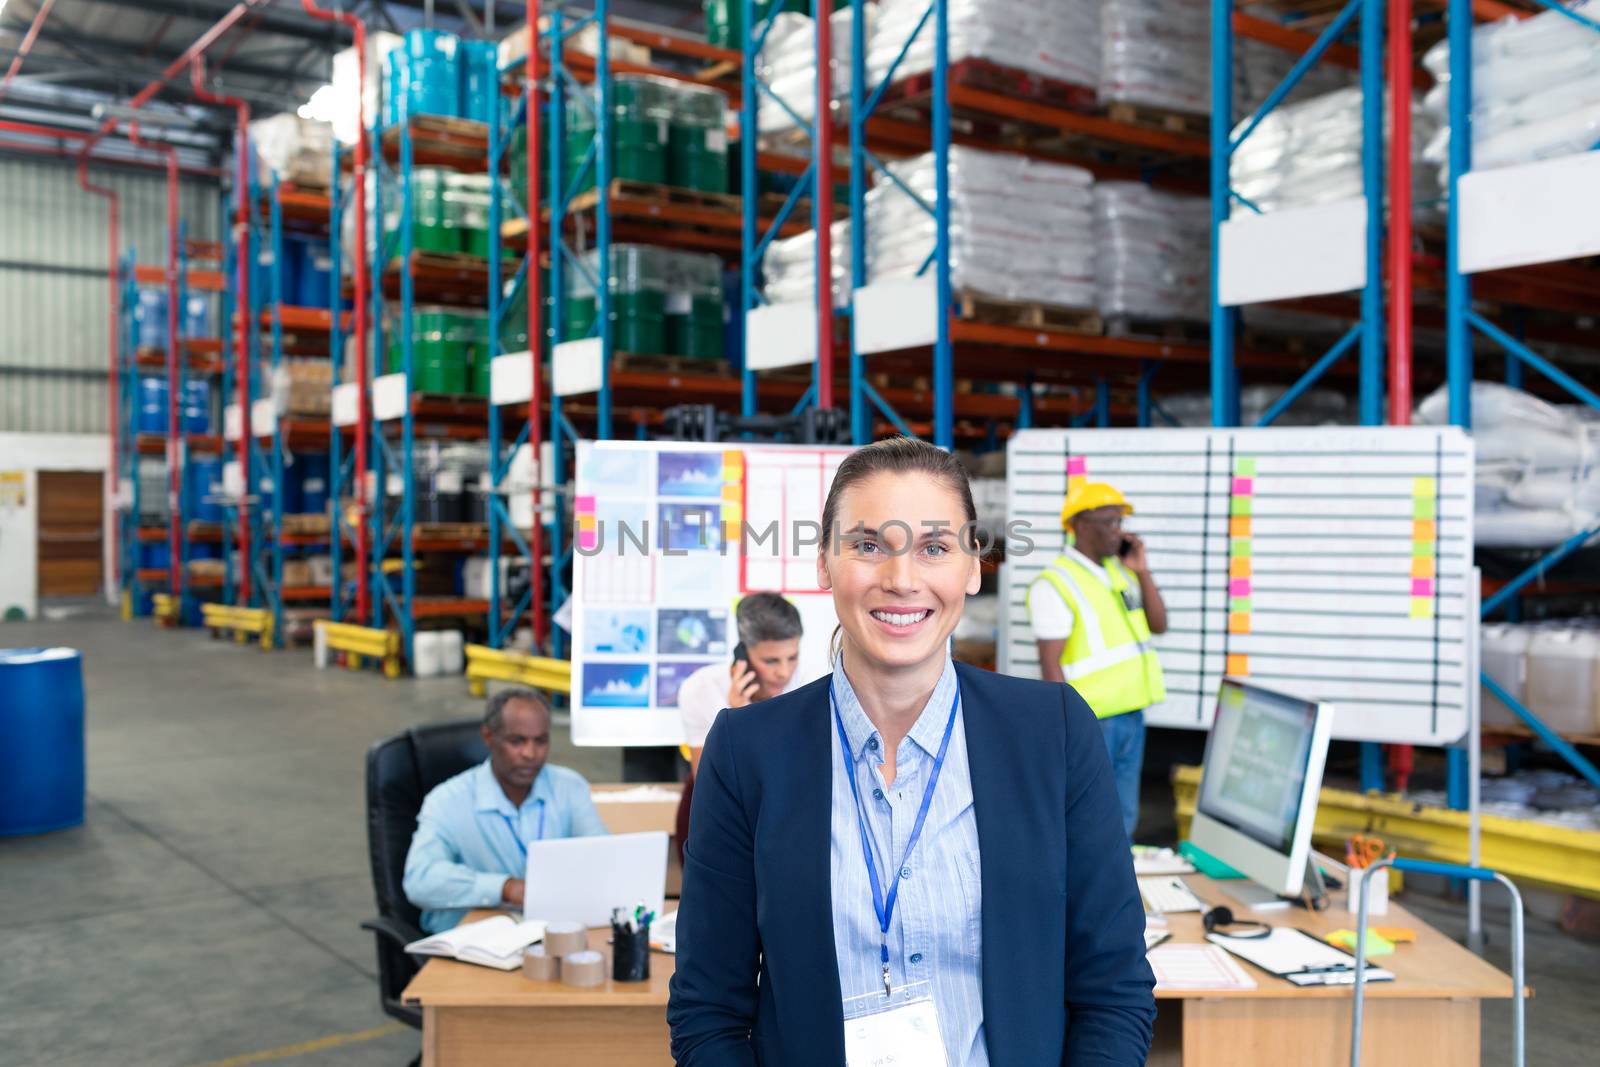 Portrait of happy mature Caucasian female manager looking at camera in warehouse. Diverse colleagues are working in the background. This is a freight transportation and distribution warehouse. Industrial and industrial workers concept